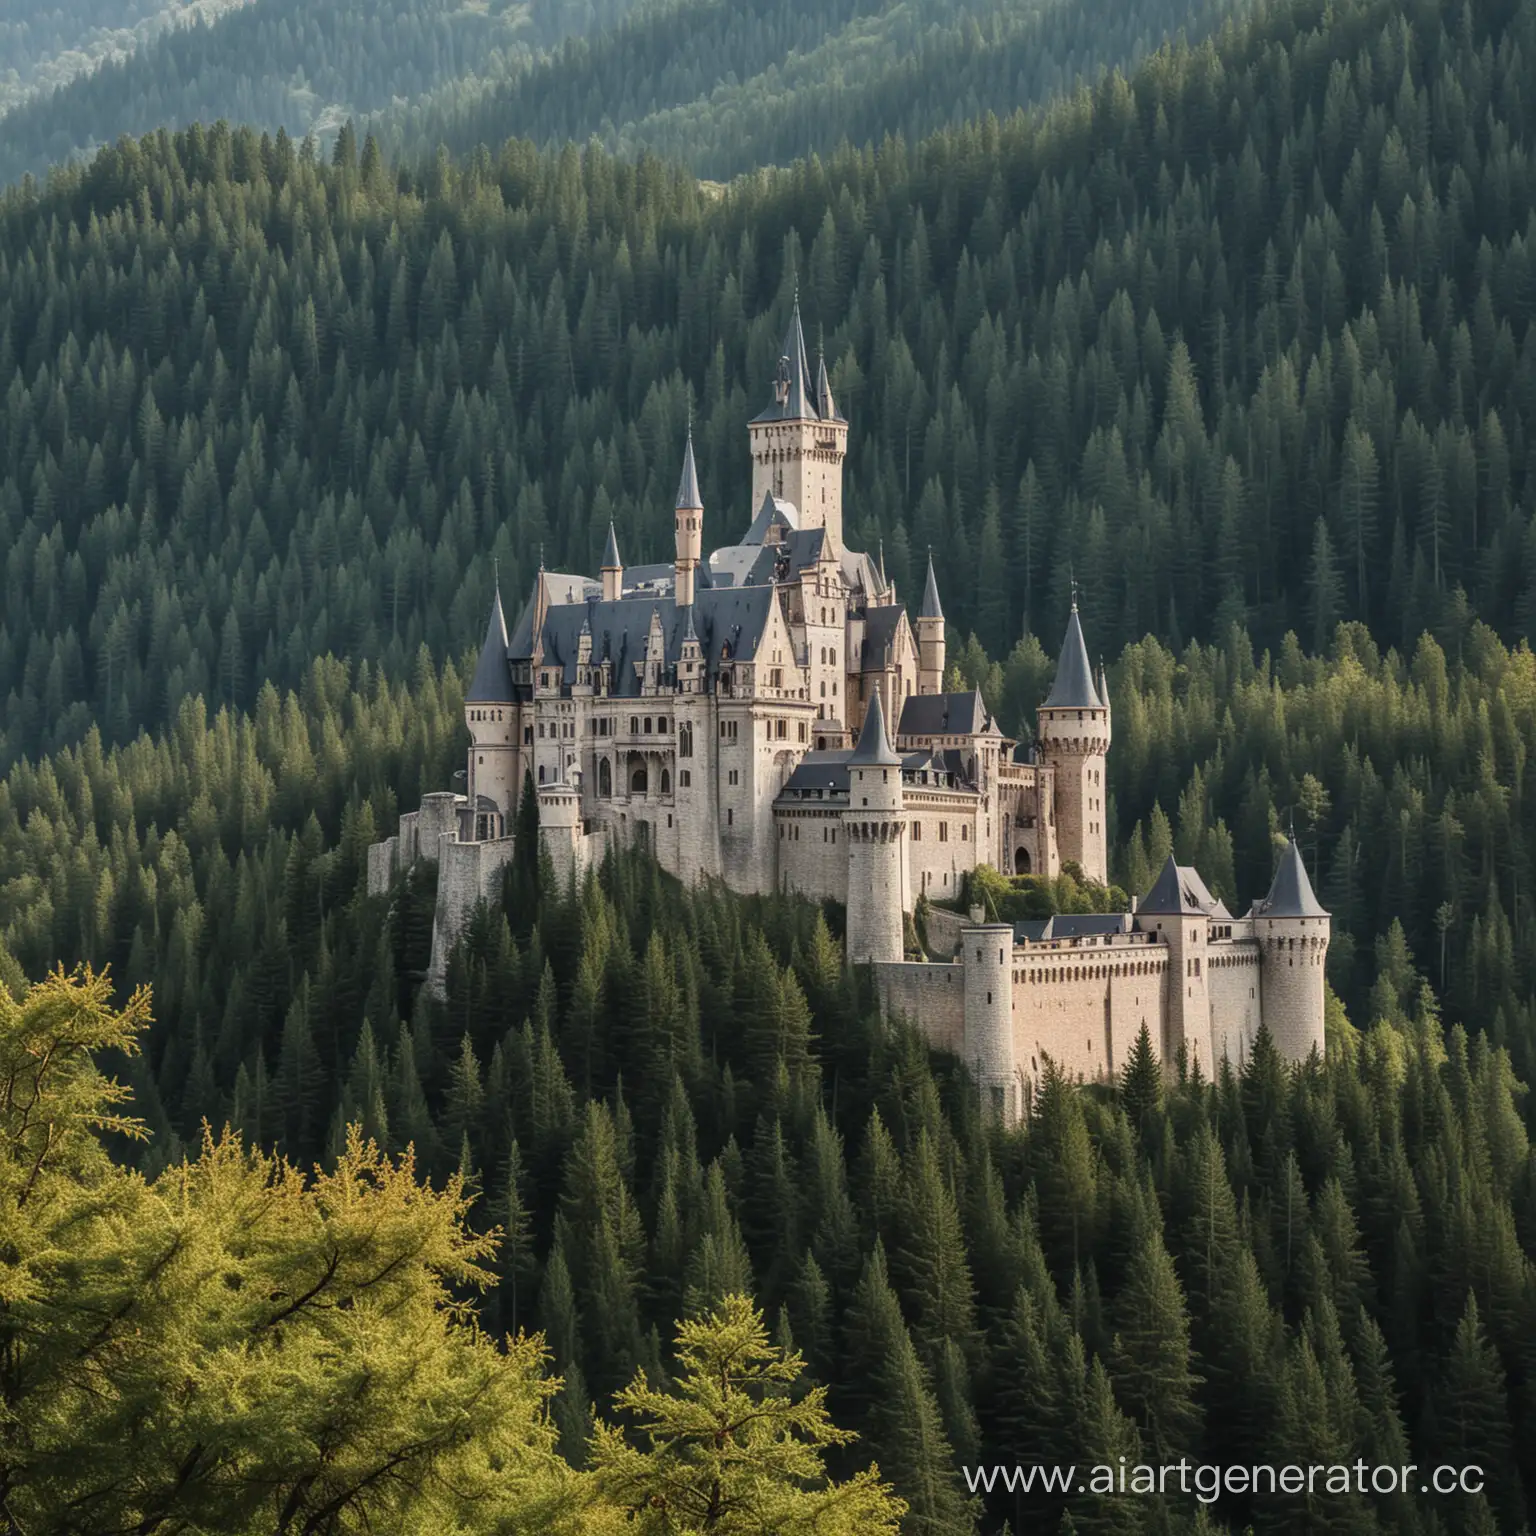 Gothic-Medieval-Castle-Nestled-in-Fir-Forest-at-Mountains-Base